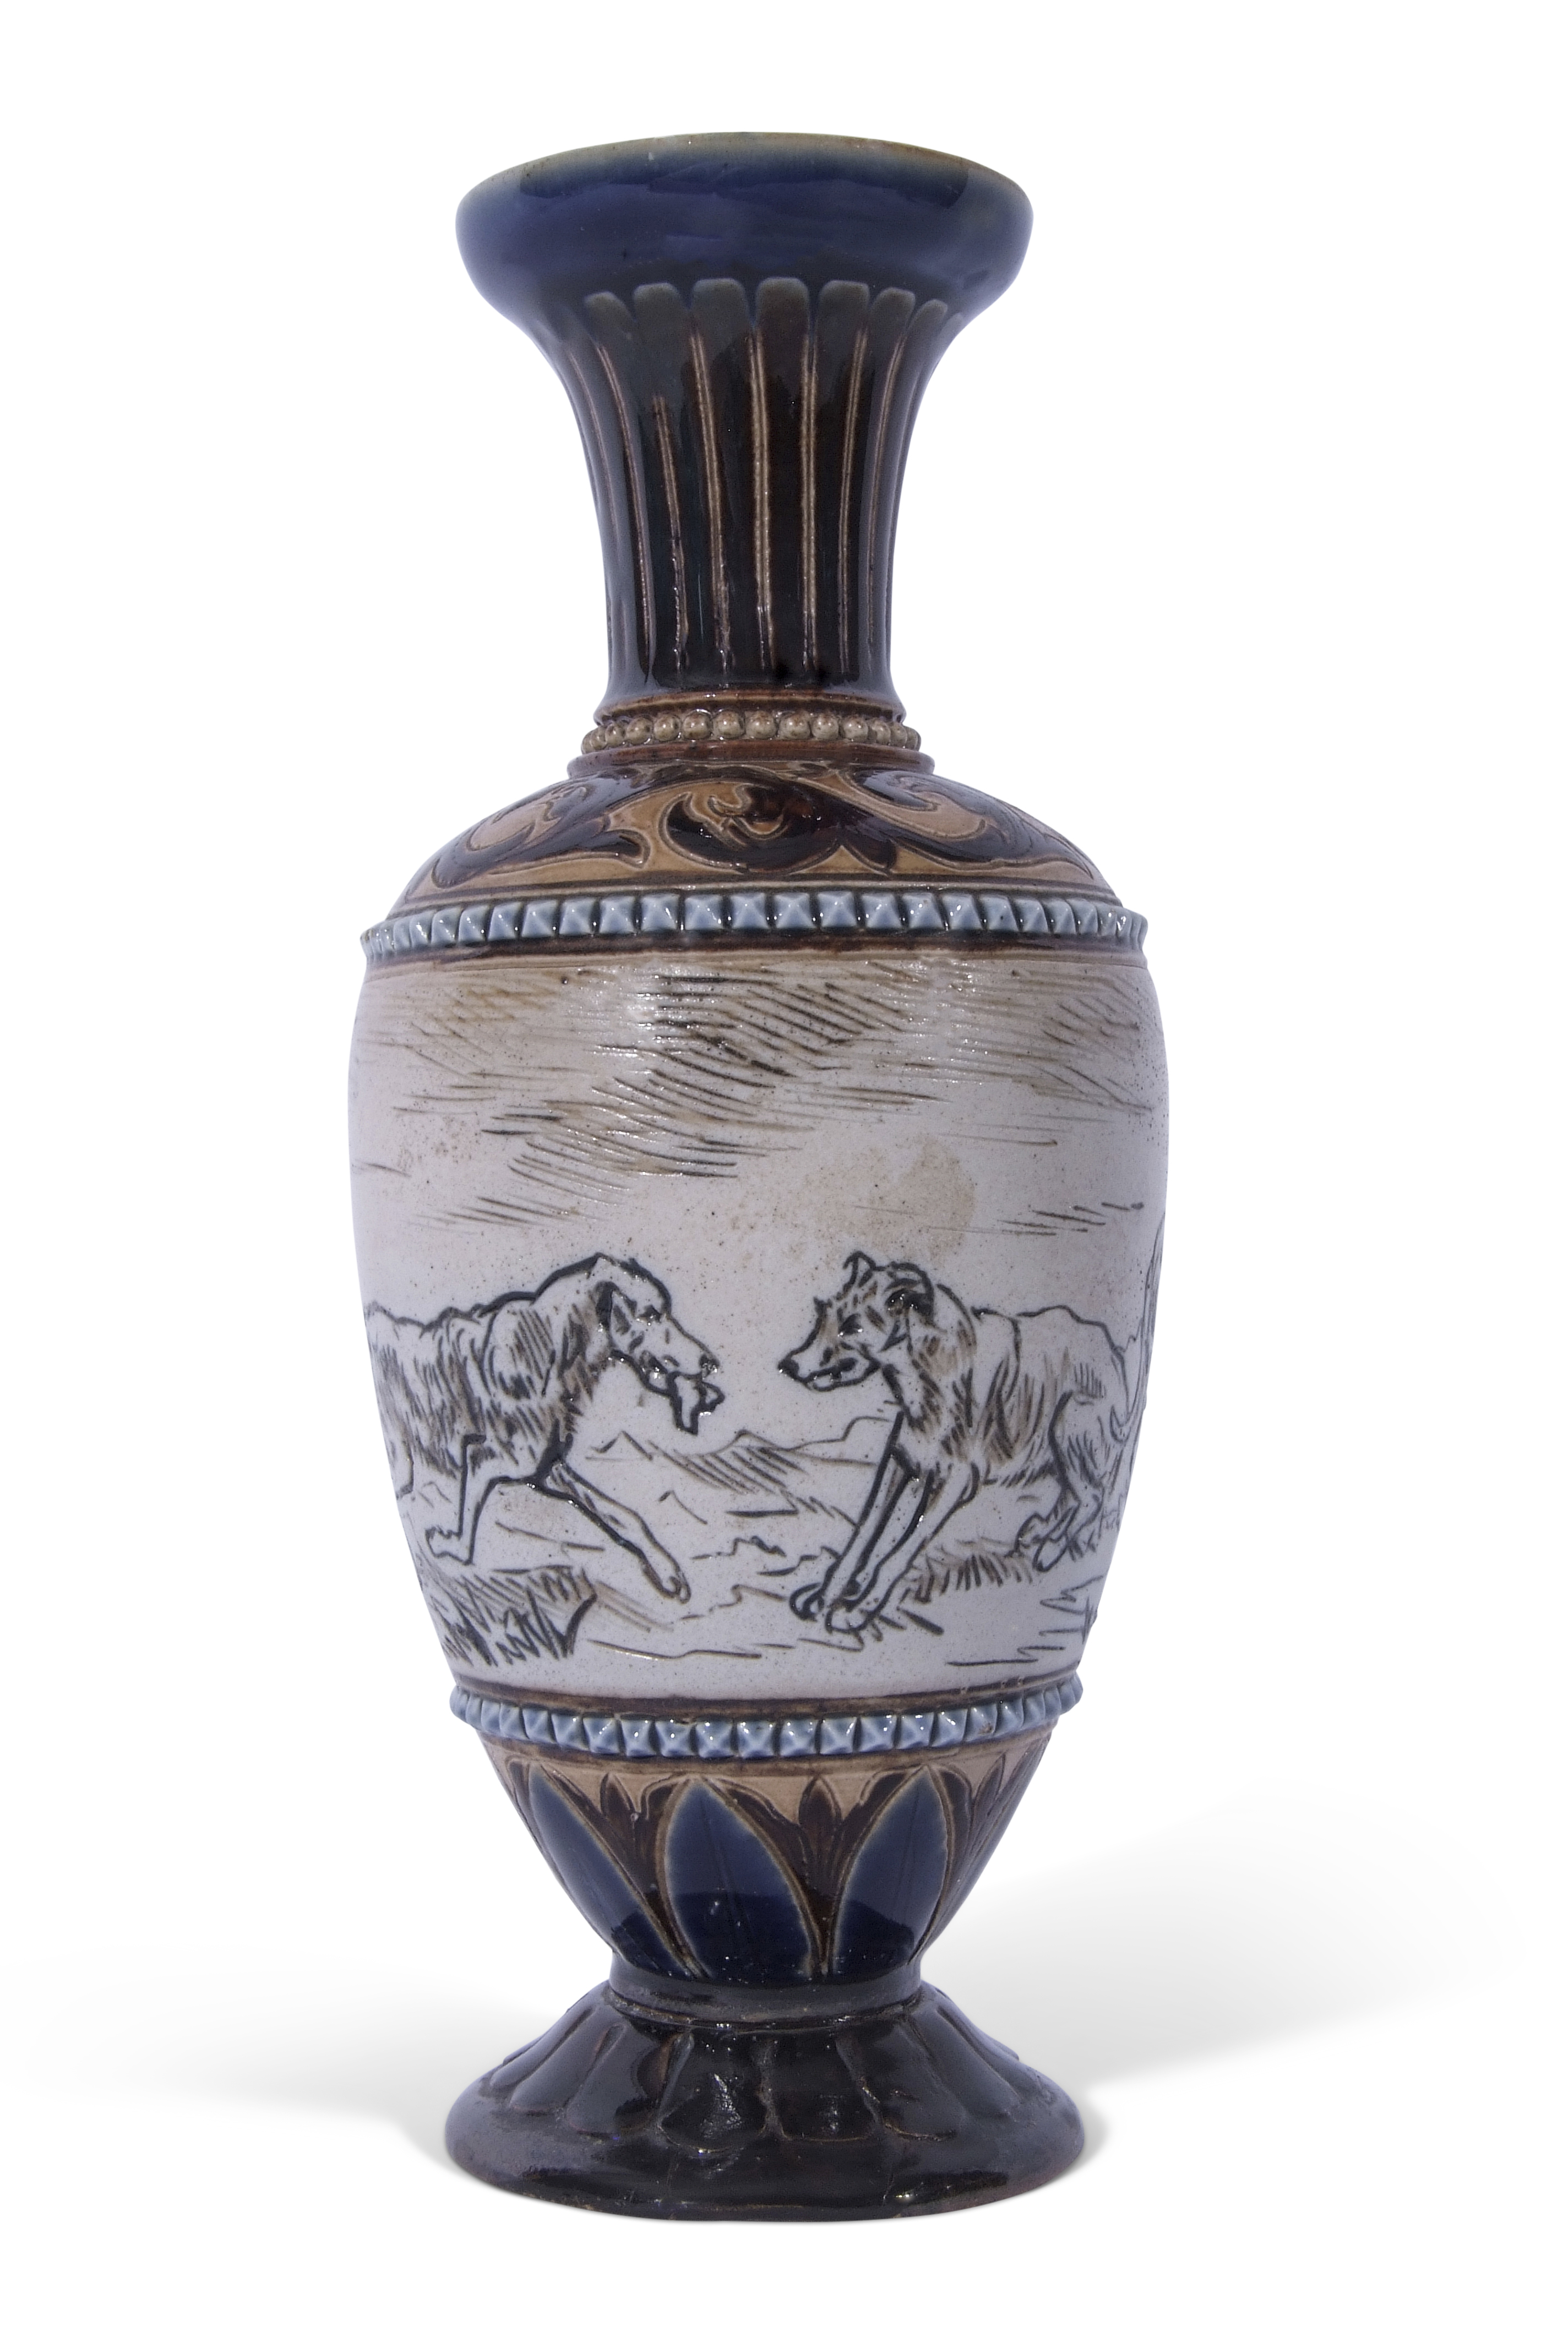 Doulton Lambeth vase by Hannah Barlow with incised design of dogs (repair to foot), 21cm high